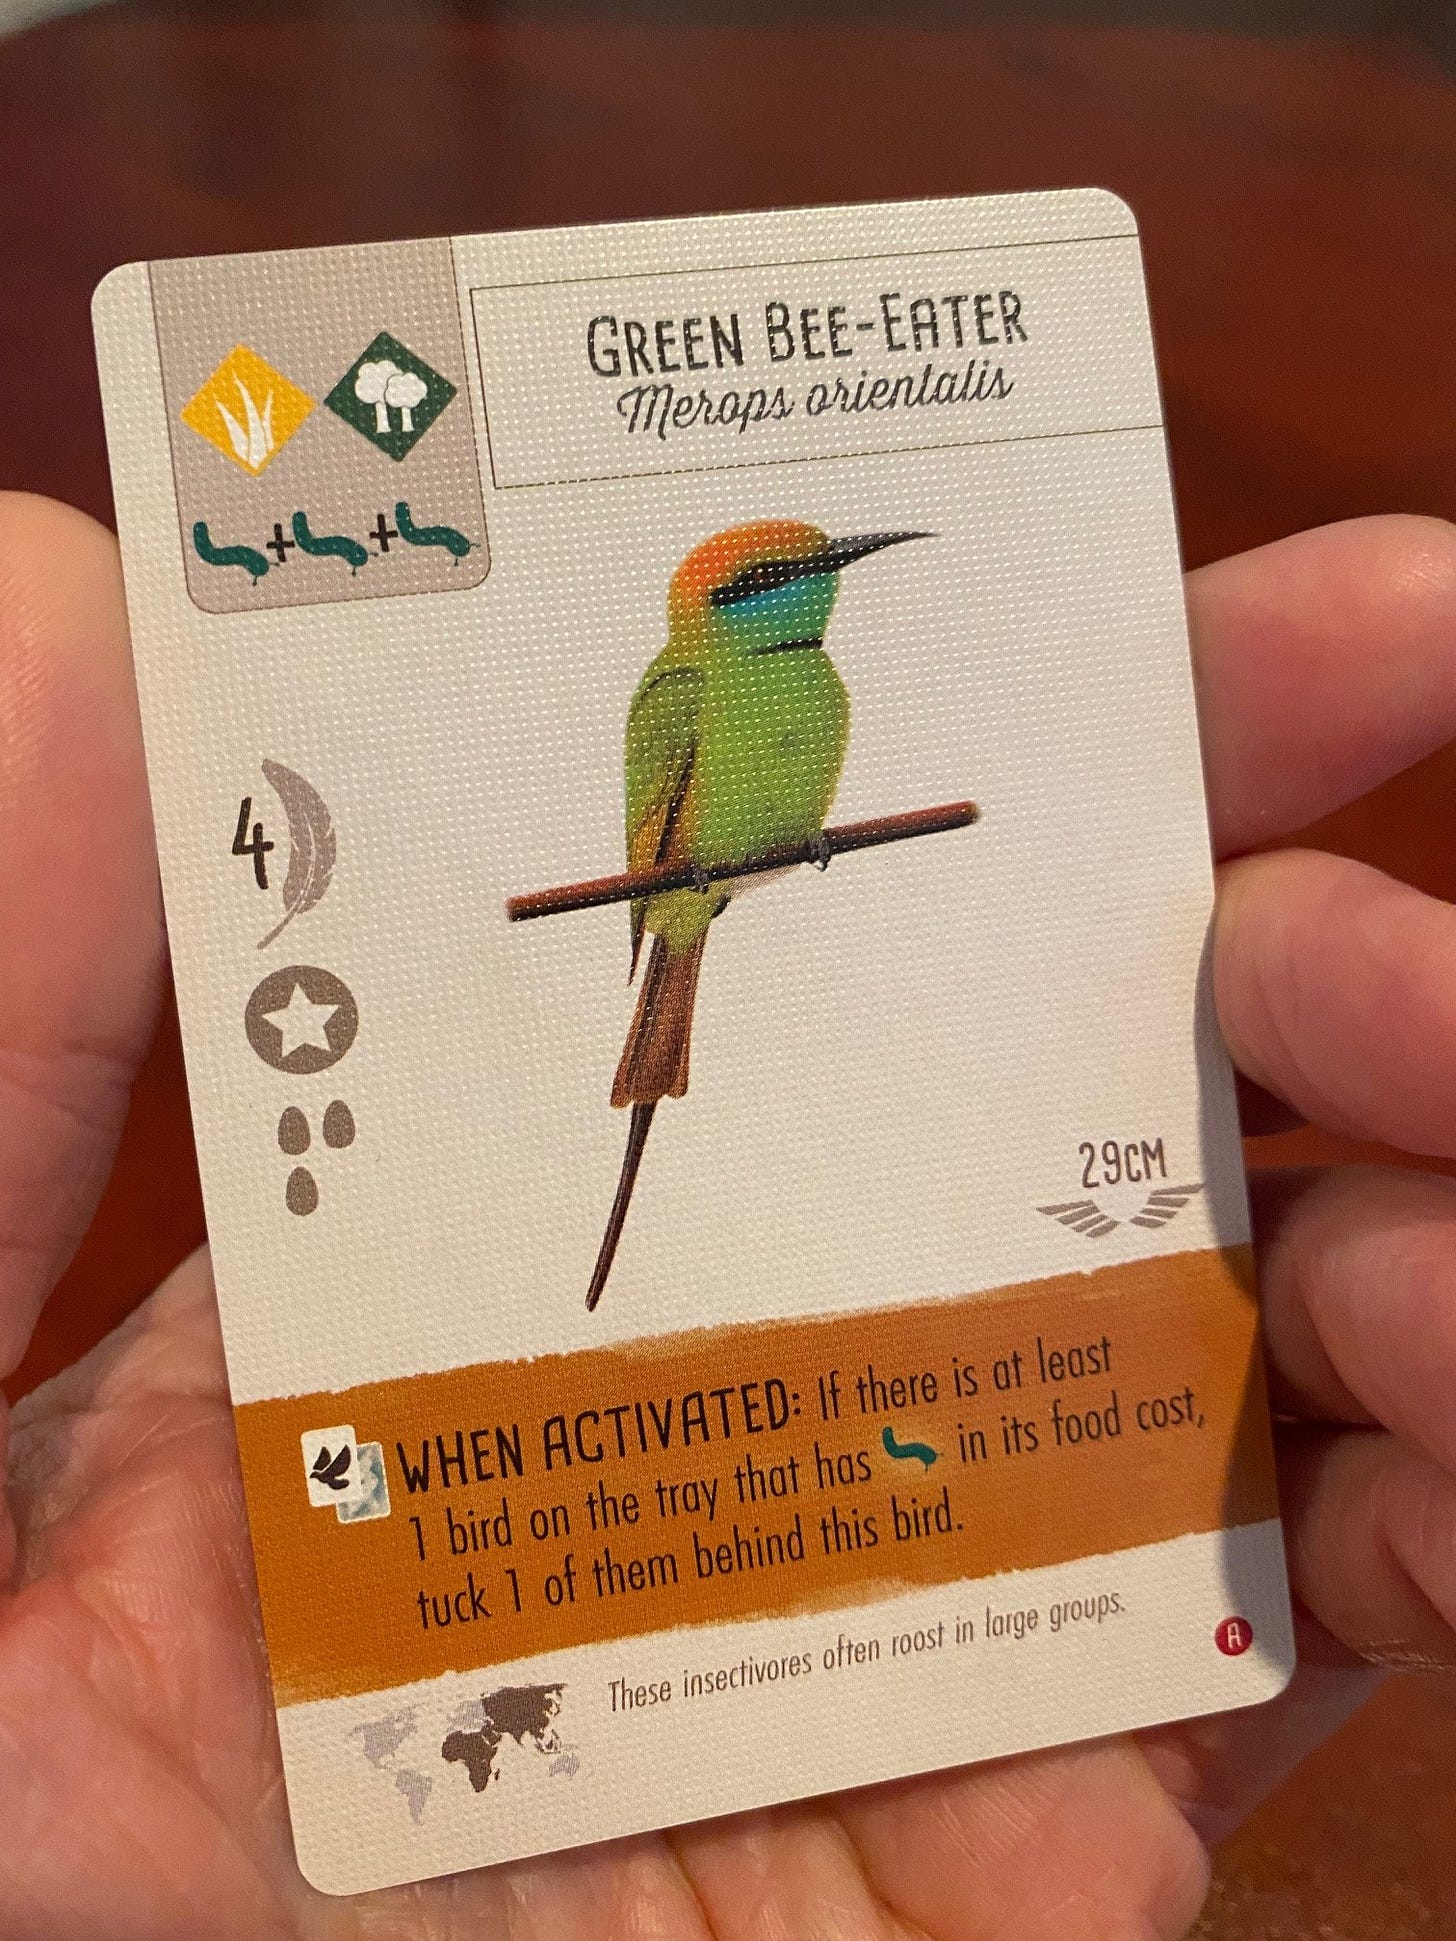 May be an image of bird and text that says 'GREEN GREENBEE-EATER BEE-EATER merops orientalis 4 29CM here is at least WHEN ACTIVATED: has っ in its food cost, bird on the tray that tuck of them behind this bird. These insectivores often roost in large groups.'